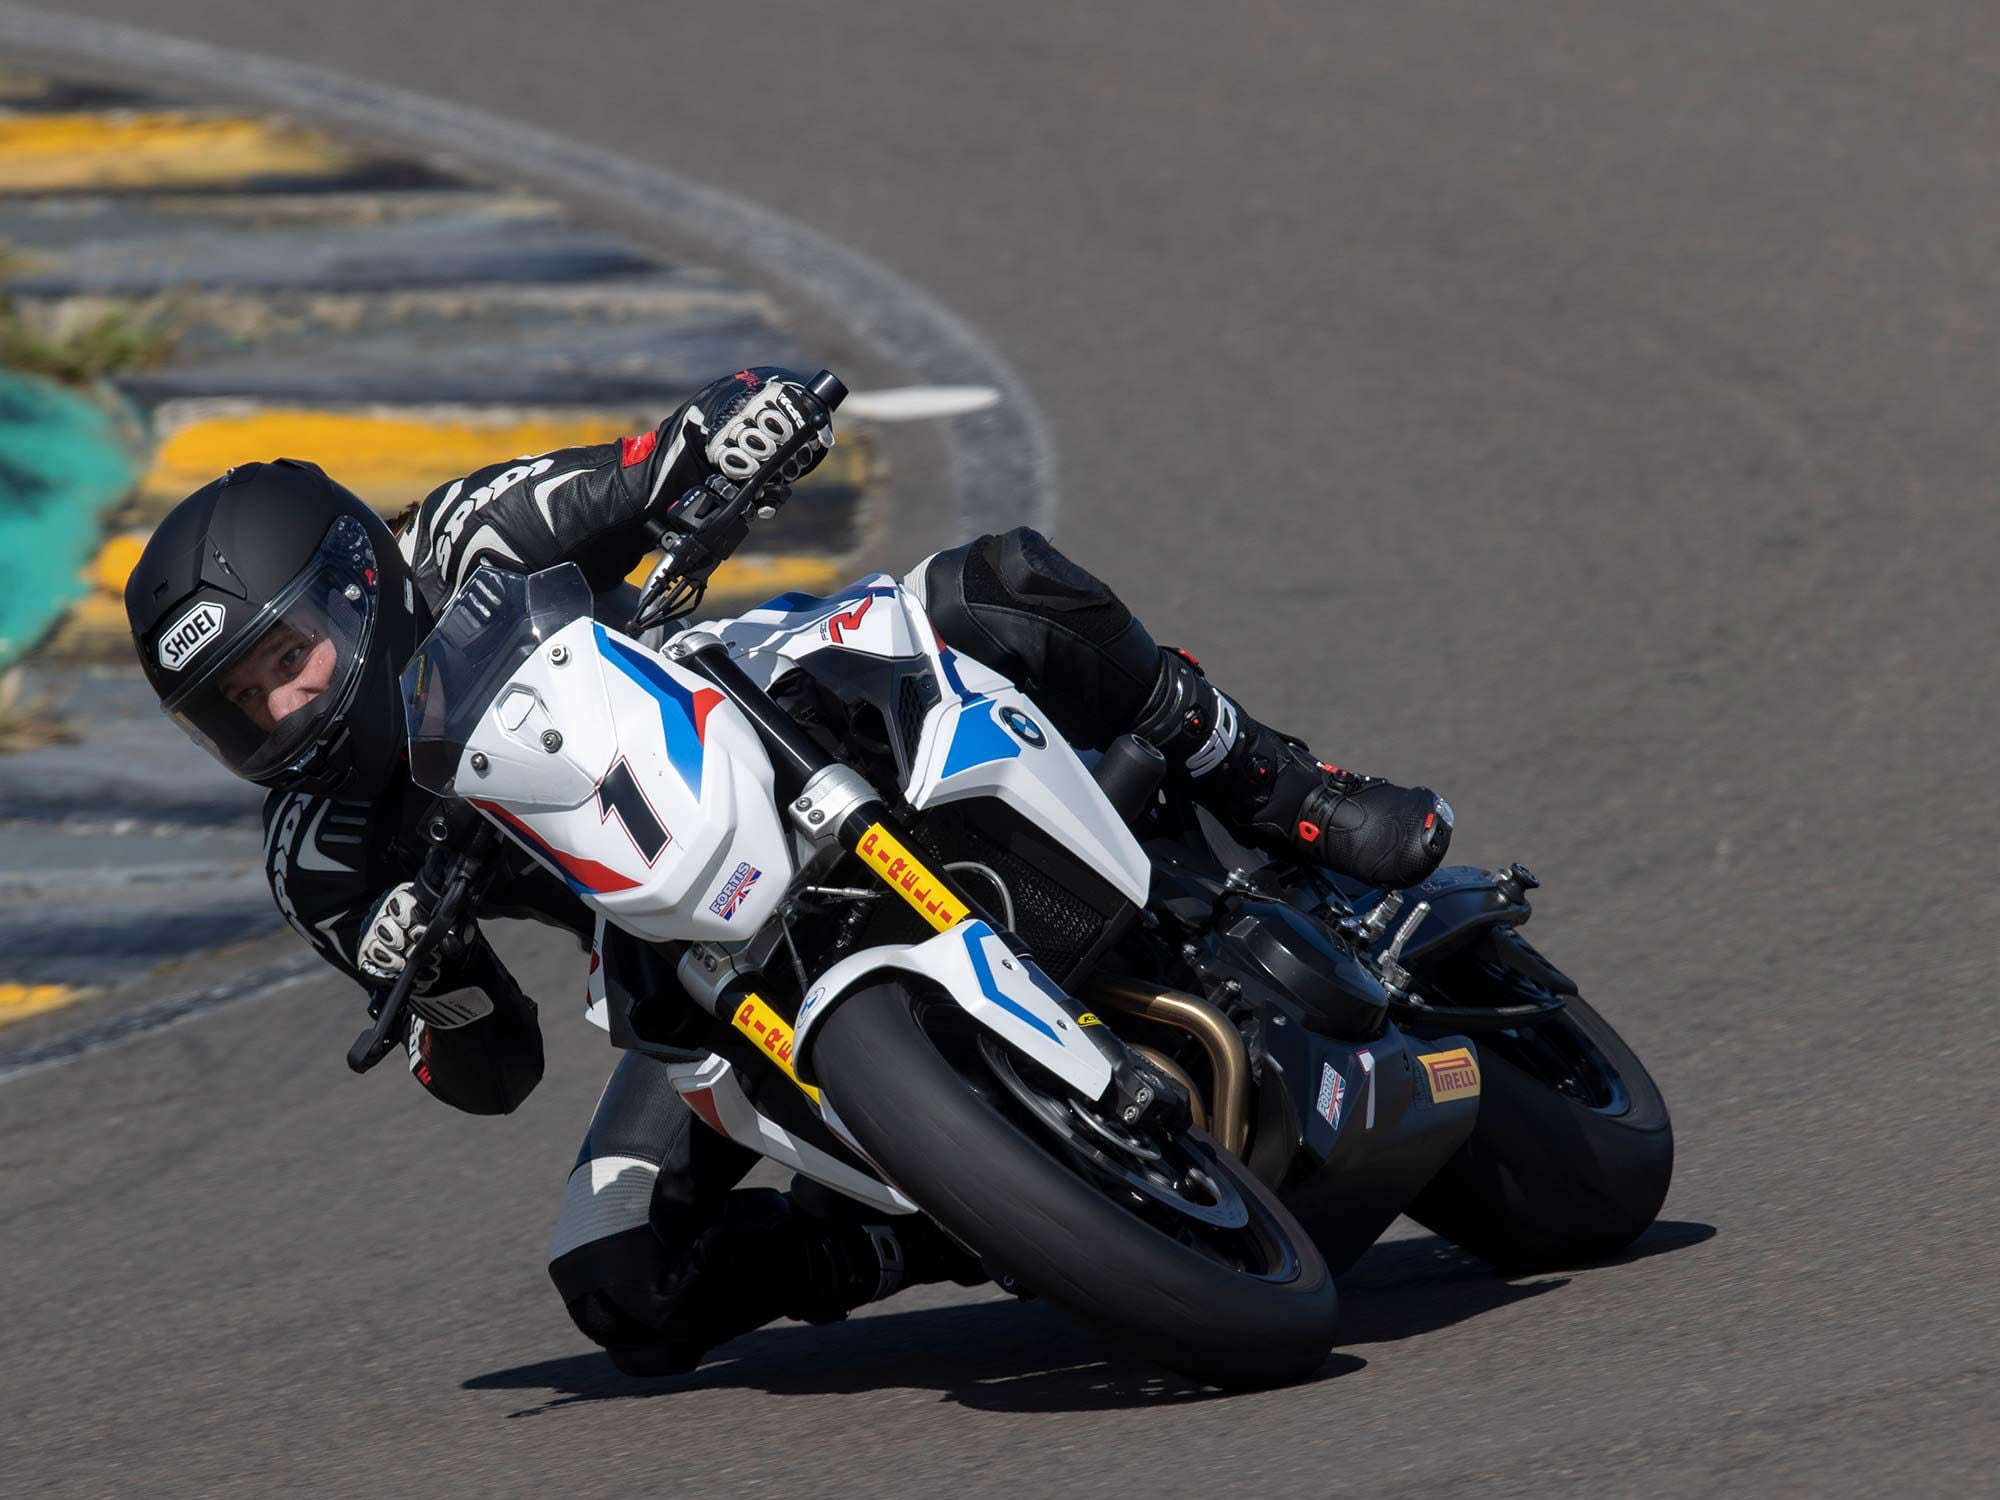 BMW F 900 R Cup Bike Review